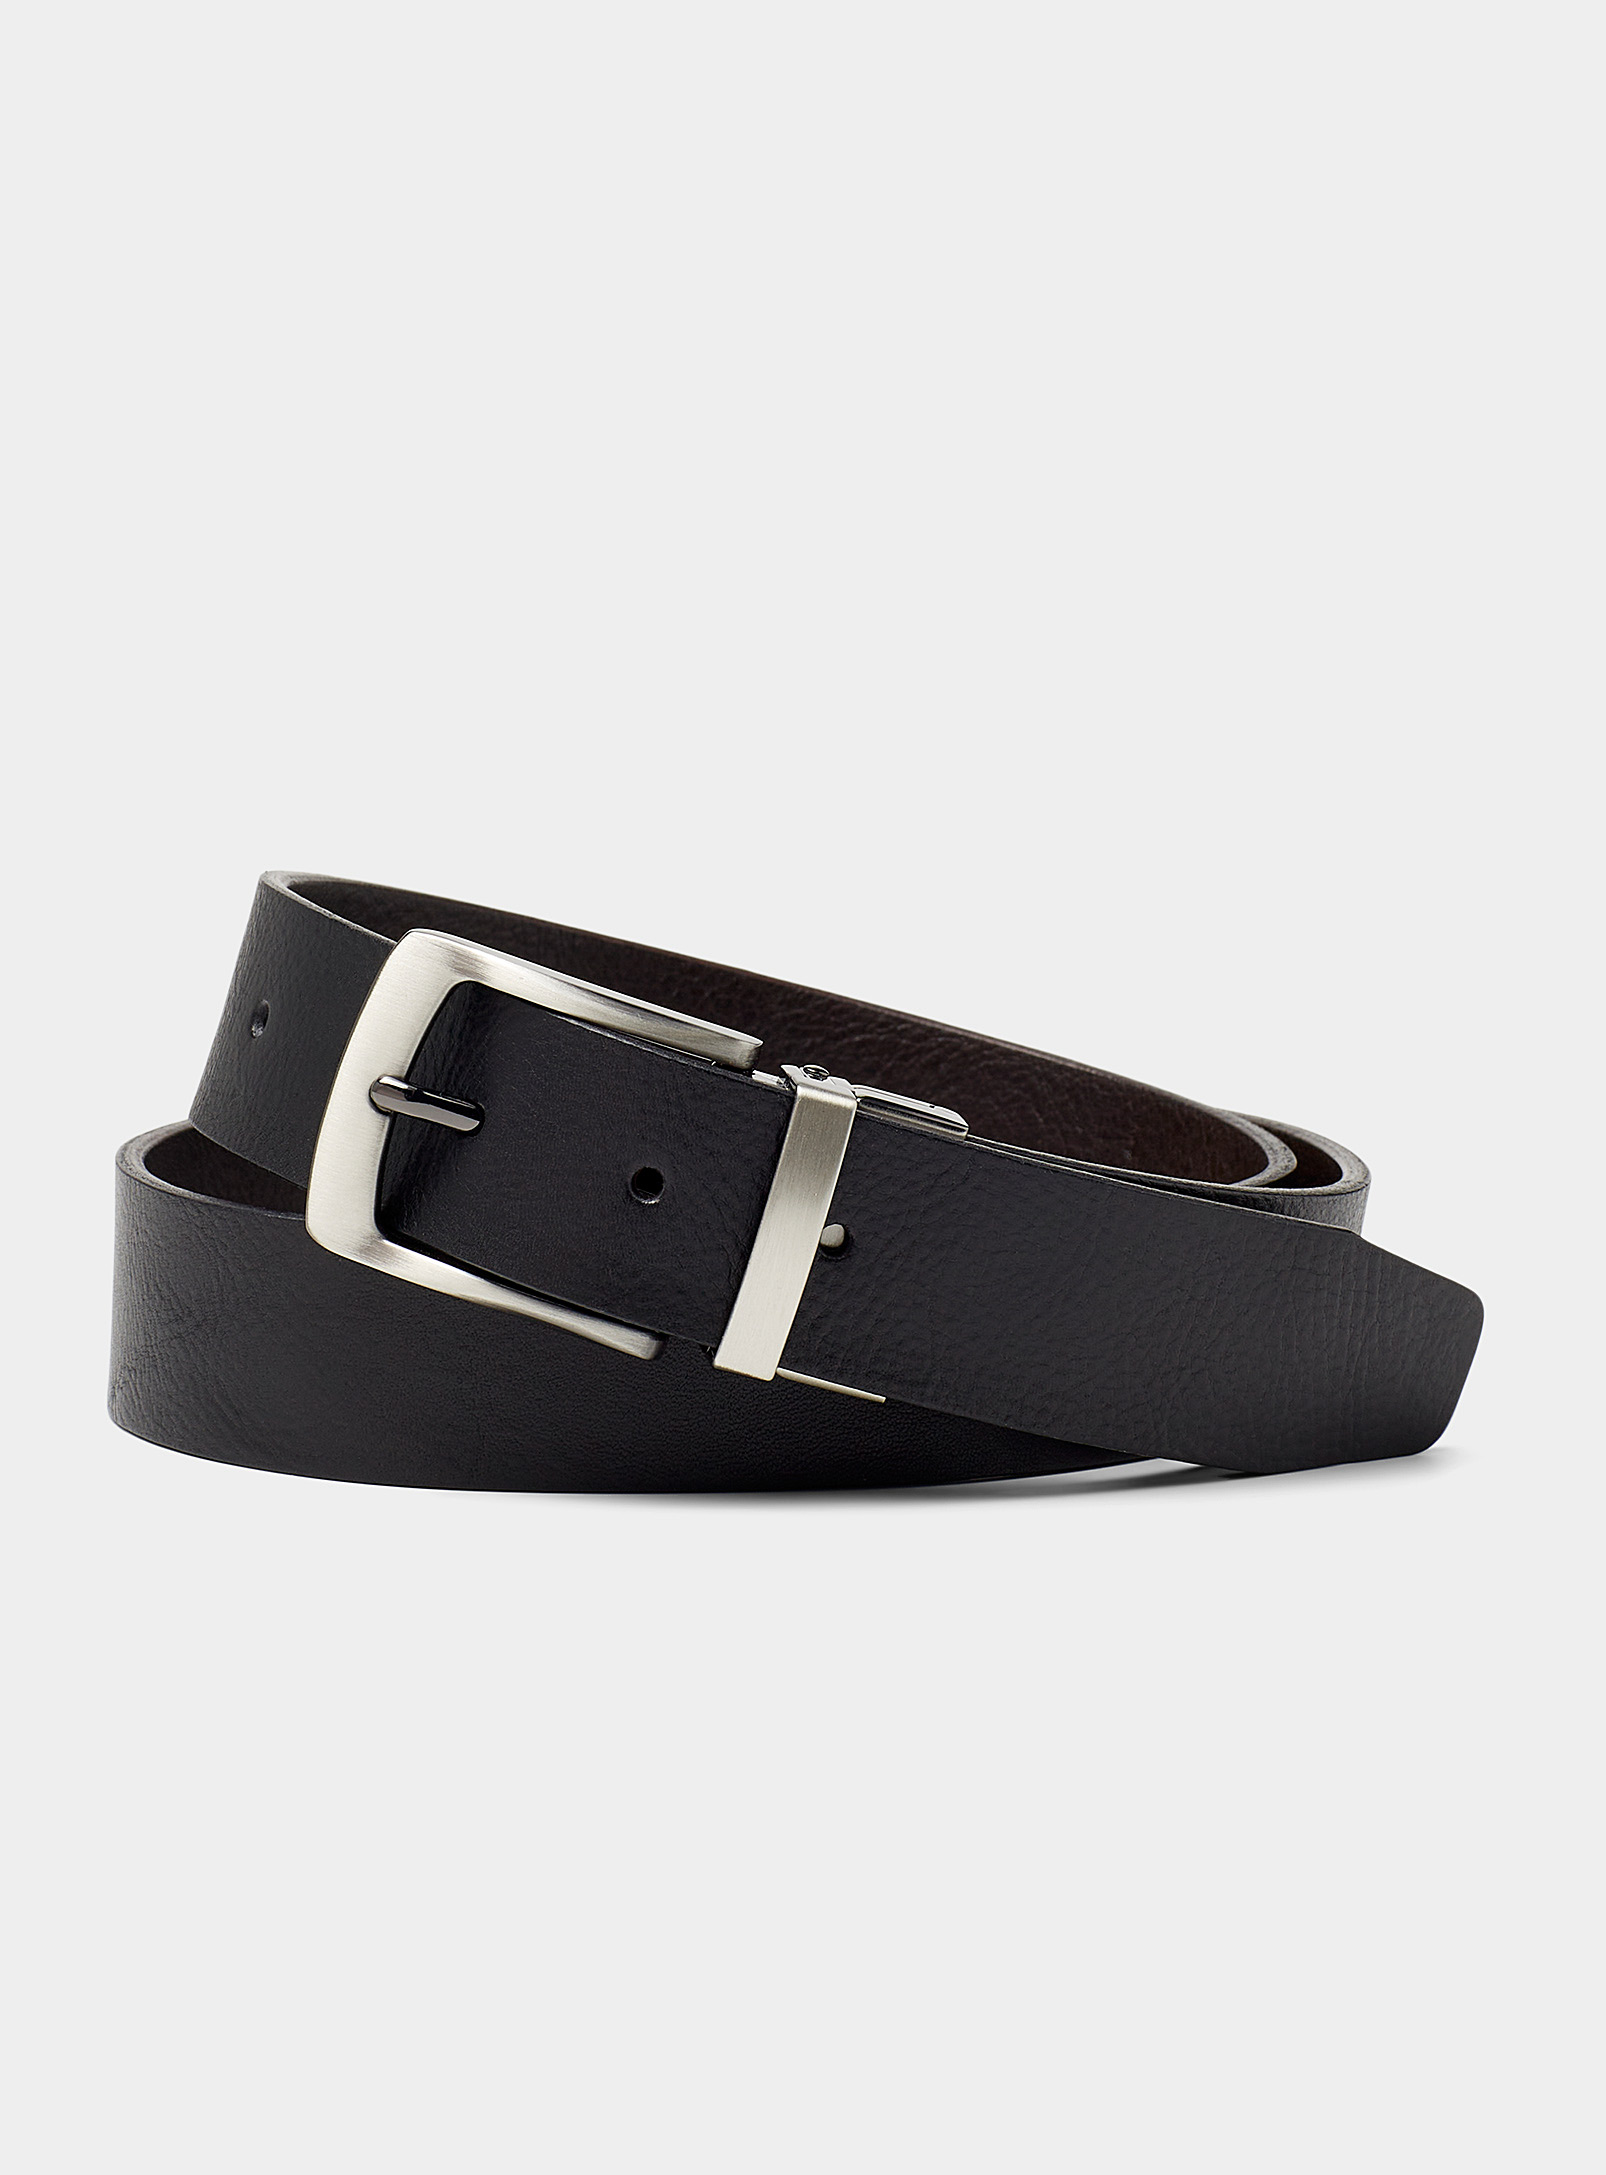 Le 31 - Men's Reversible leather belt Exclusive collection from Italy